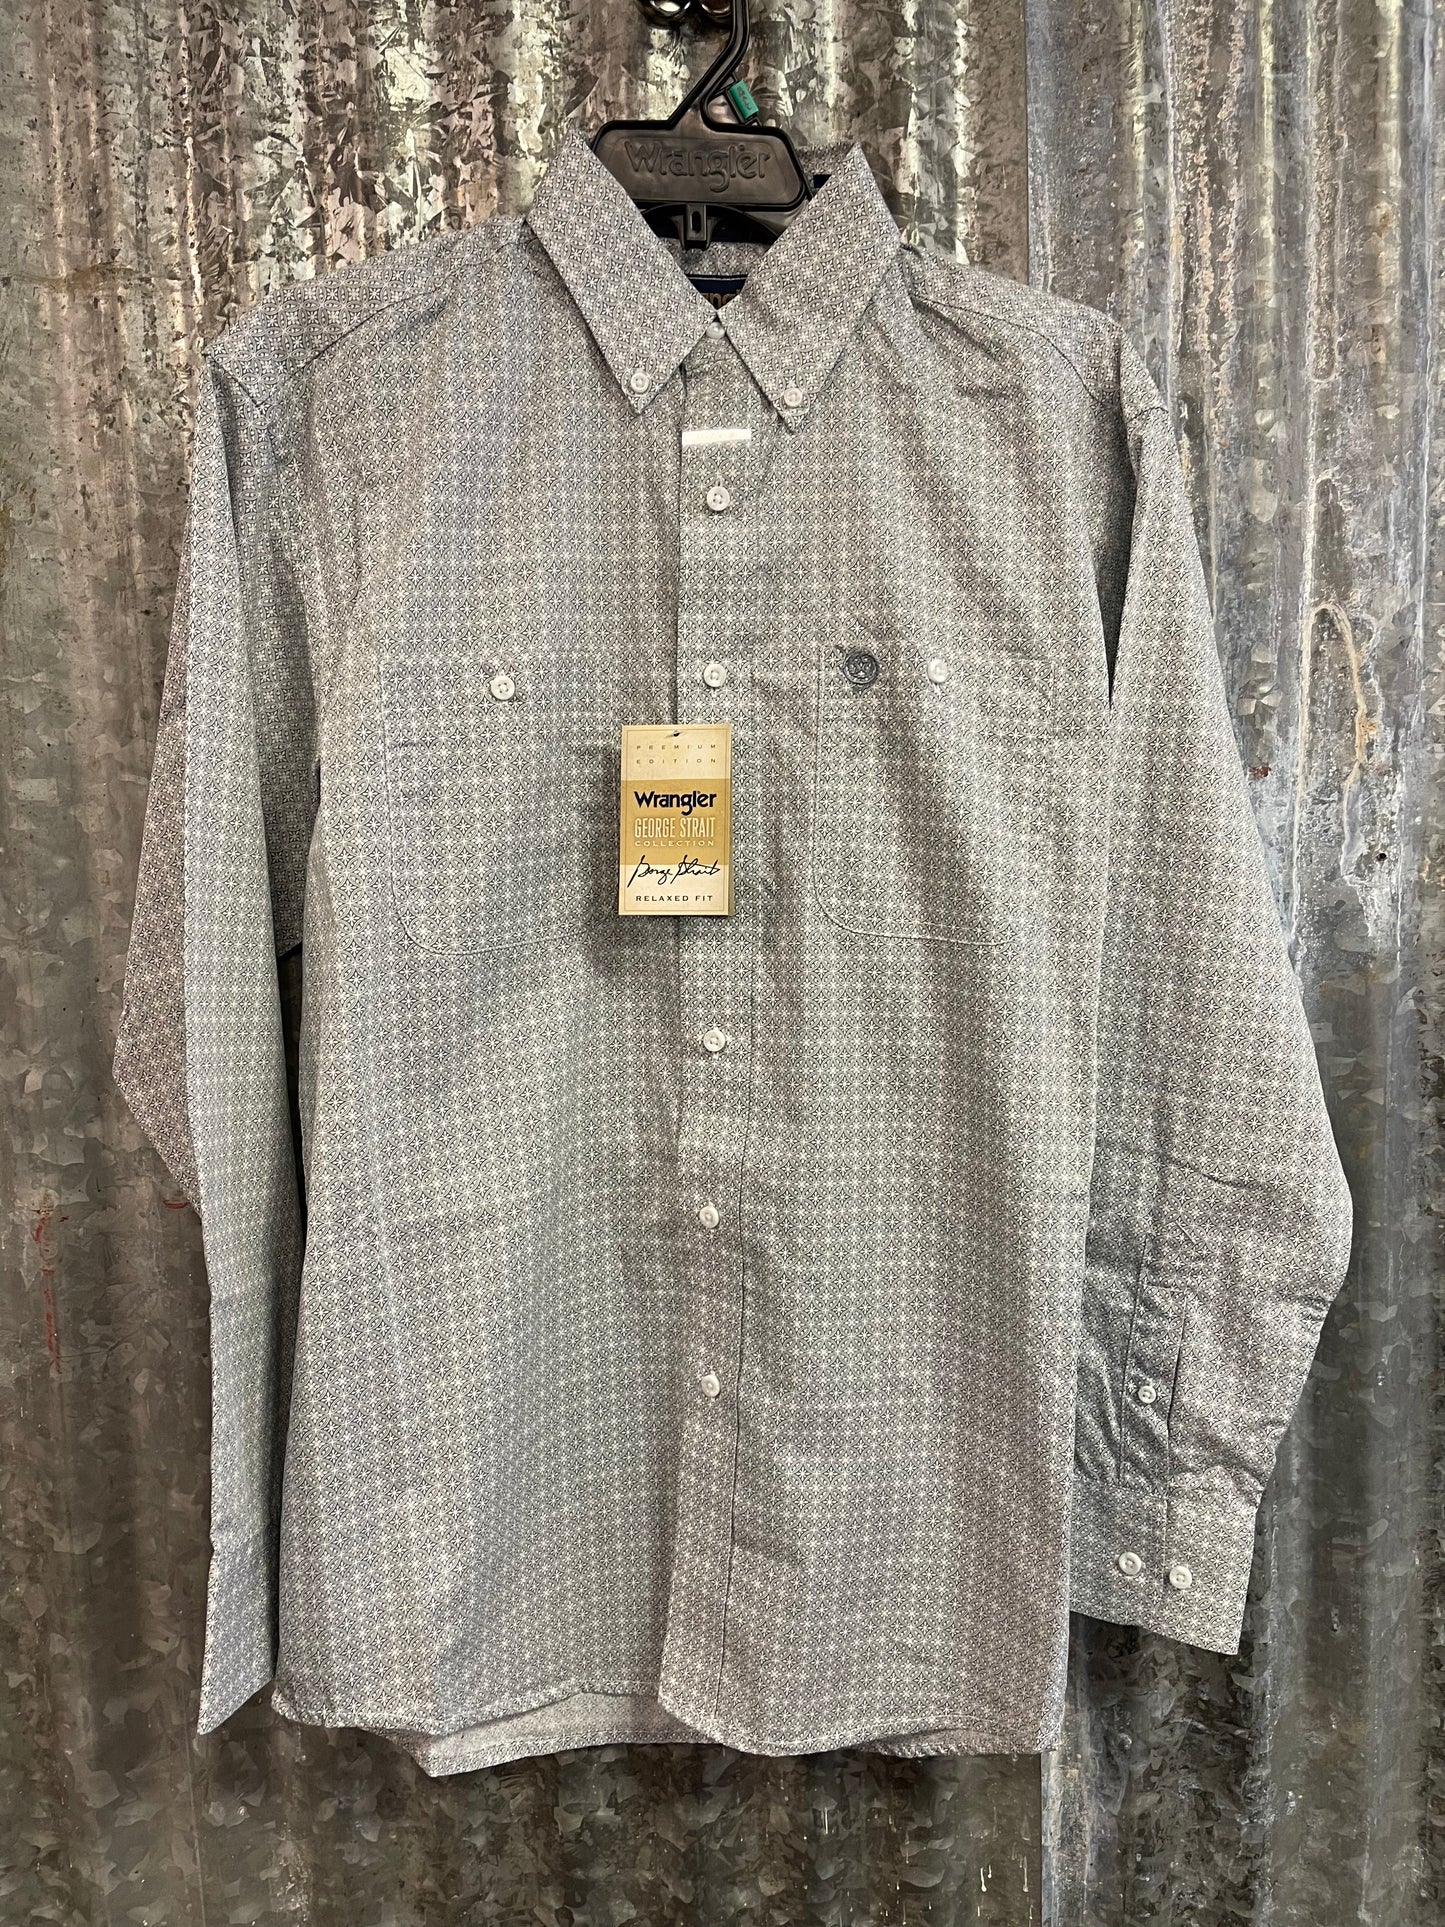 WRANGLER GEORGE STRAIT COLLECTION BUTTON UP IN GREY/WHITE PRINT